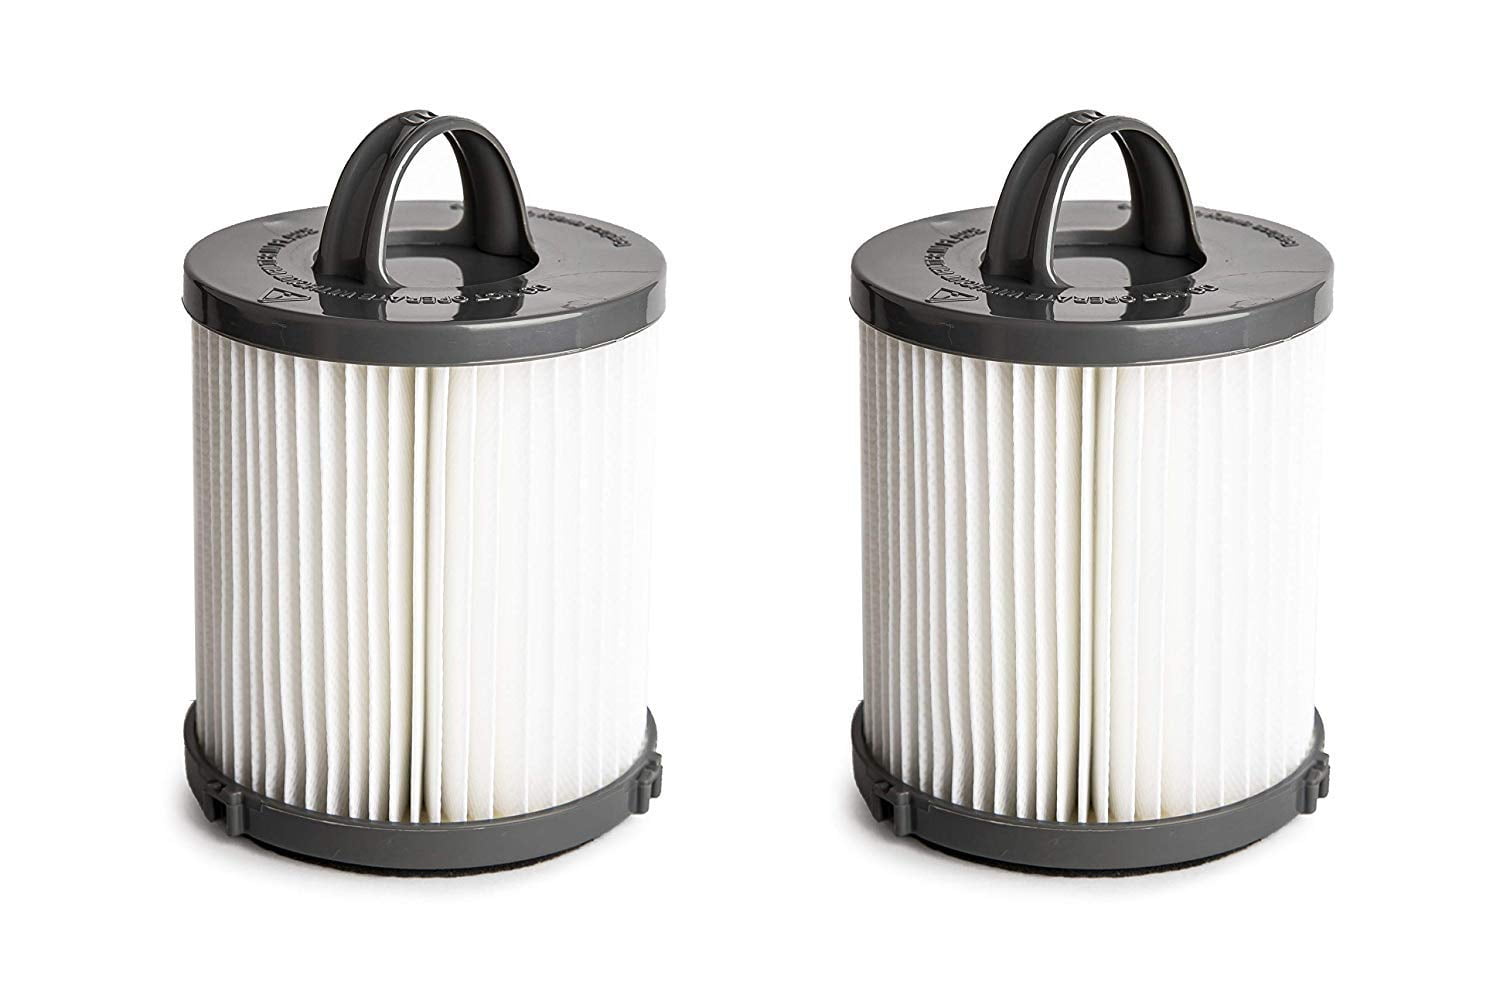 2X Vacuum Dust Cup Filter & HEPA Filter for Eureka AS1001A